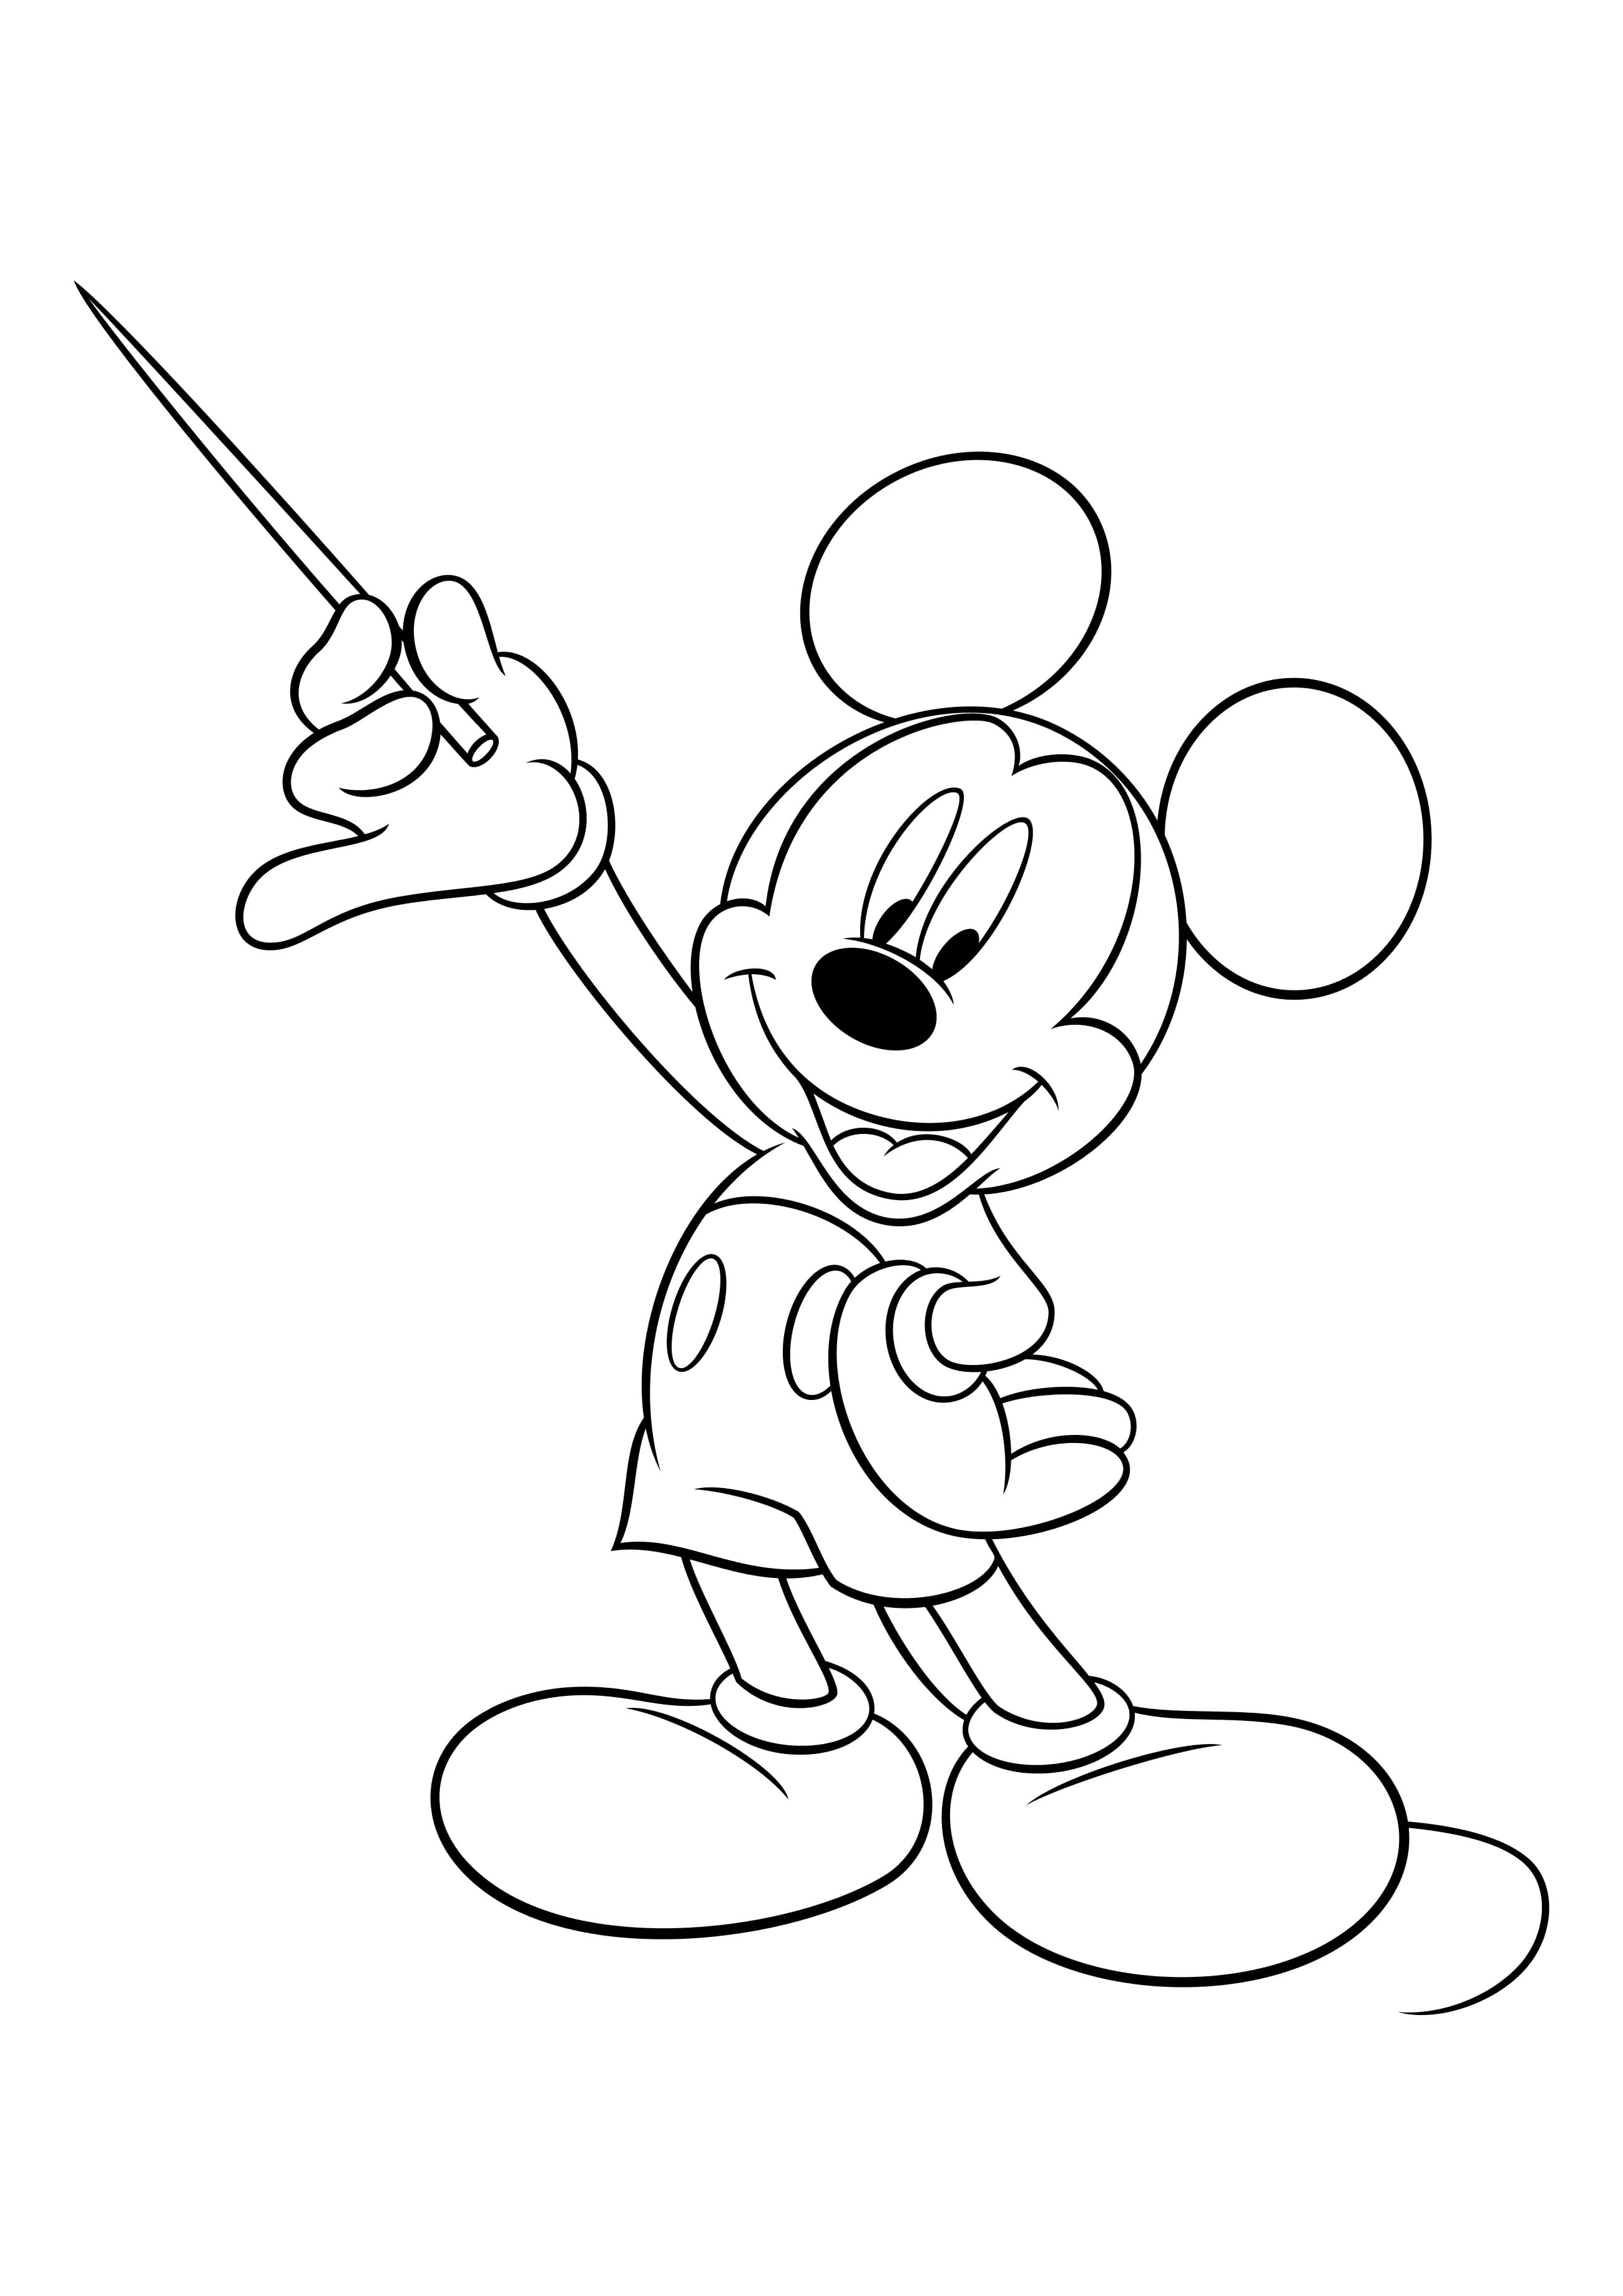 minnie mouse and mickey mouse kissing coloring pages